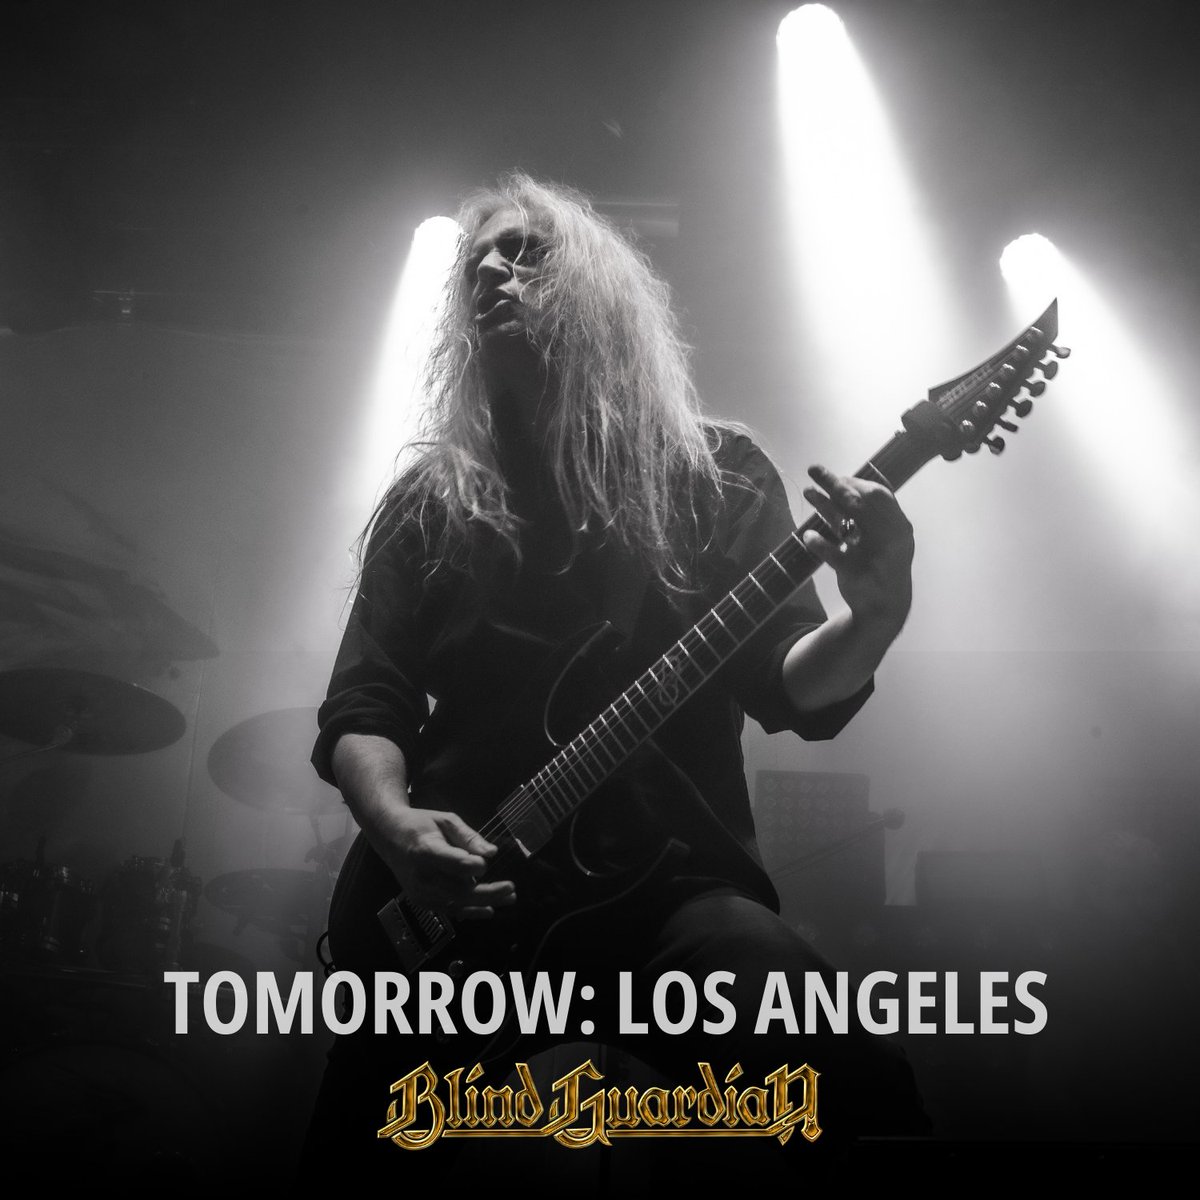 From the 'Valley of the Sun' to the 'Sunshine State' – two shows in wonderful California are coming! Los Angeles, it's your turn – let's make this an evening to remember at The Belasco. Don't miss it! ➡️ blind-guardian.com/tour #blindguardian #blindguardianusa #thegodmachinetour